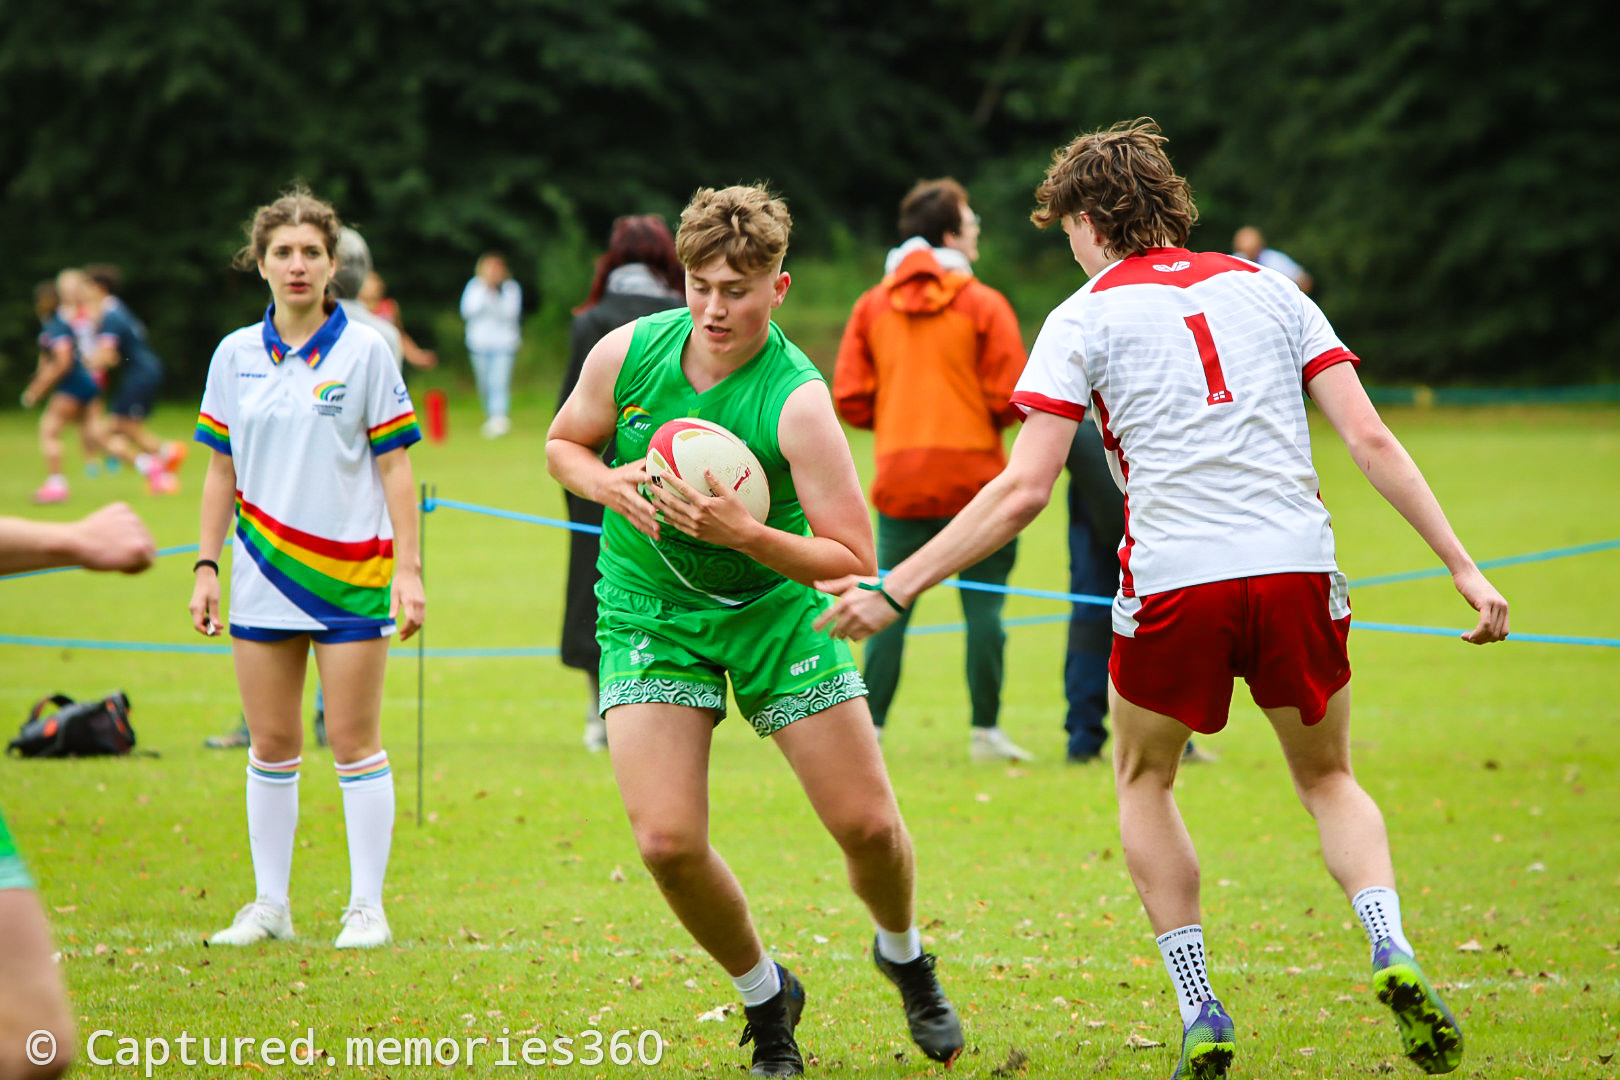 Federation of International Touch Exceptional Atlantic Youth Cup sets